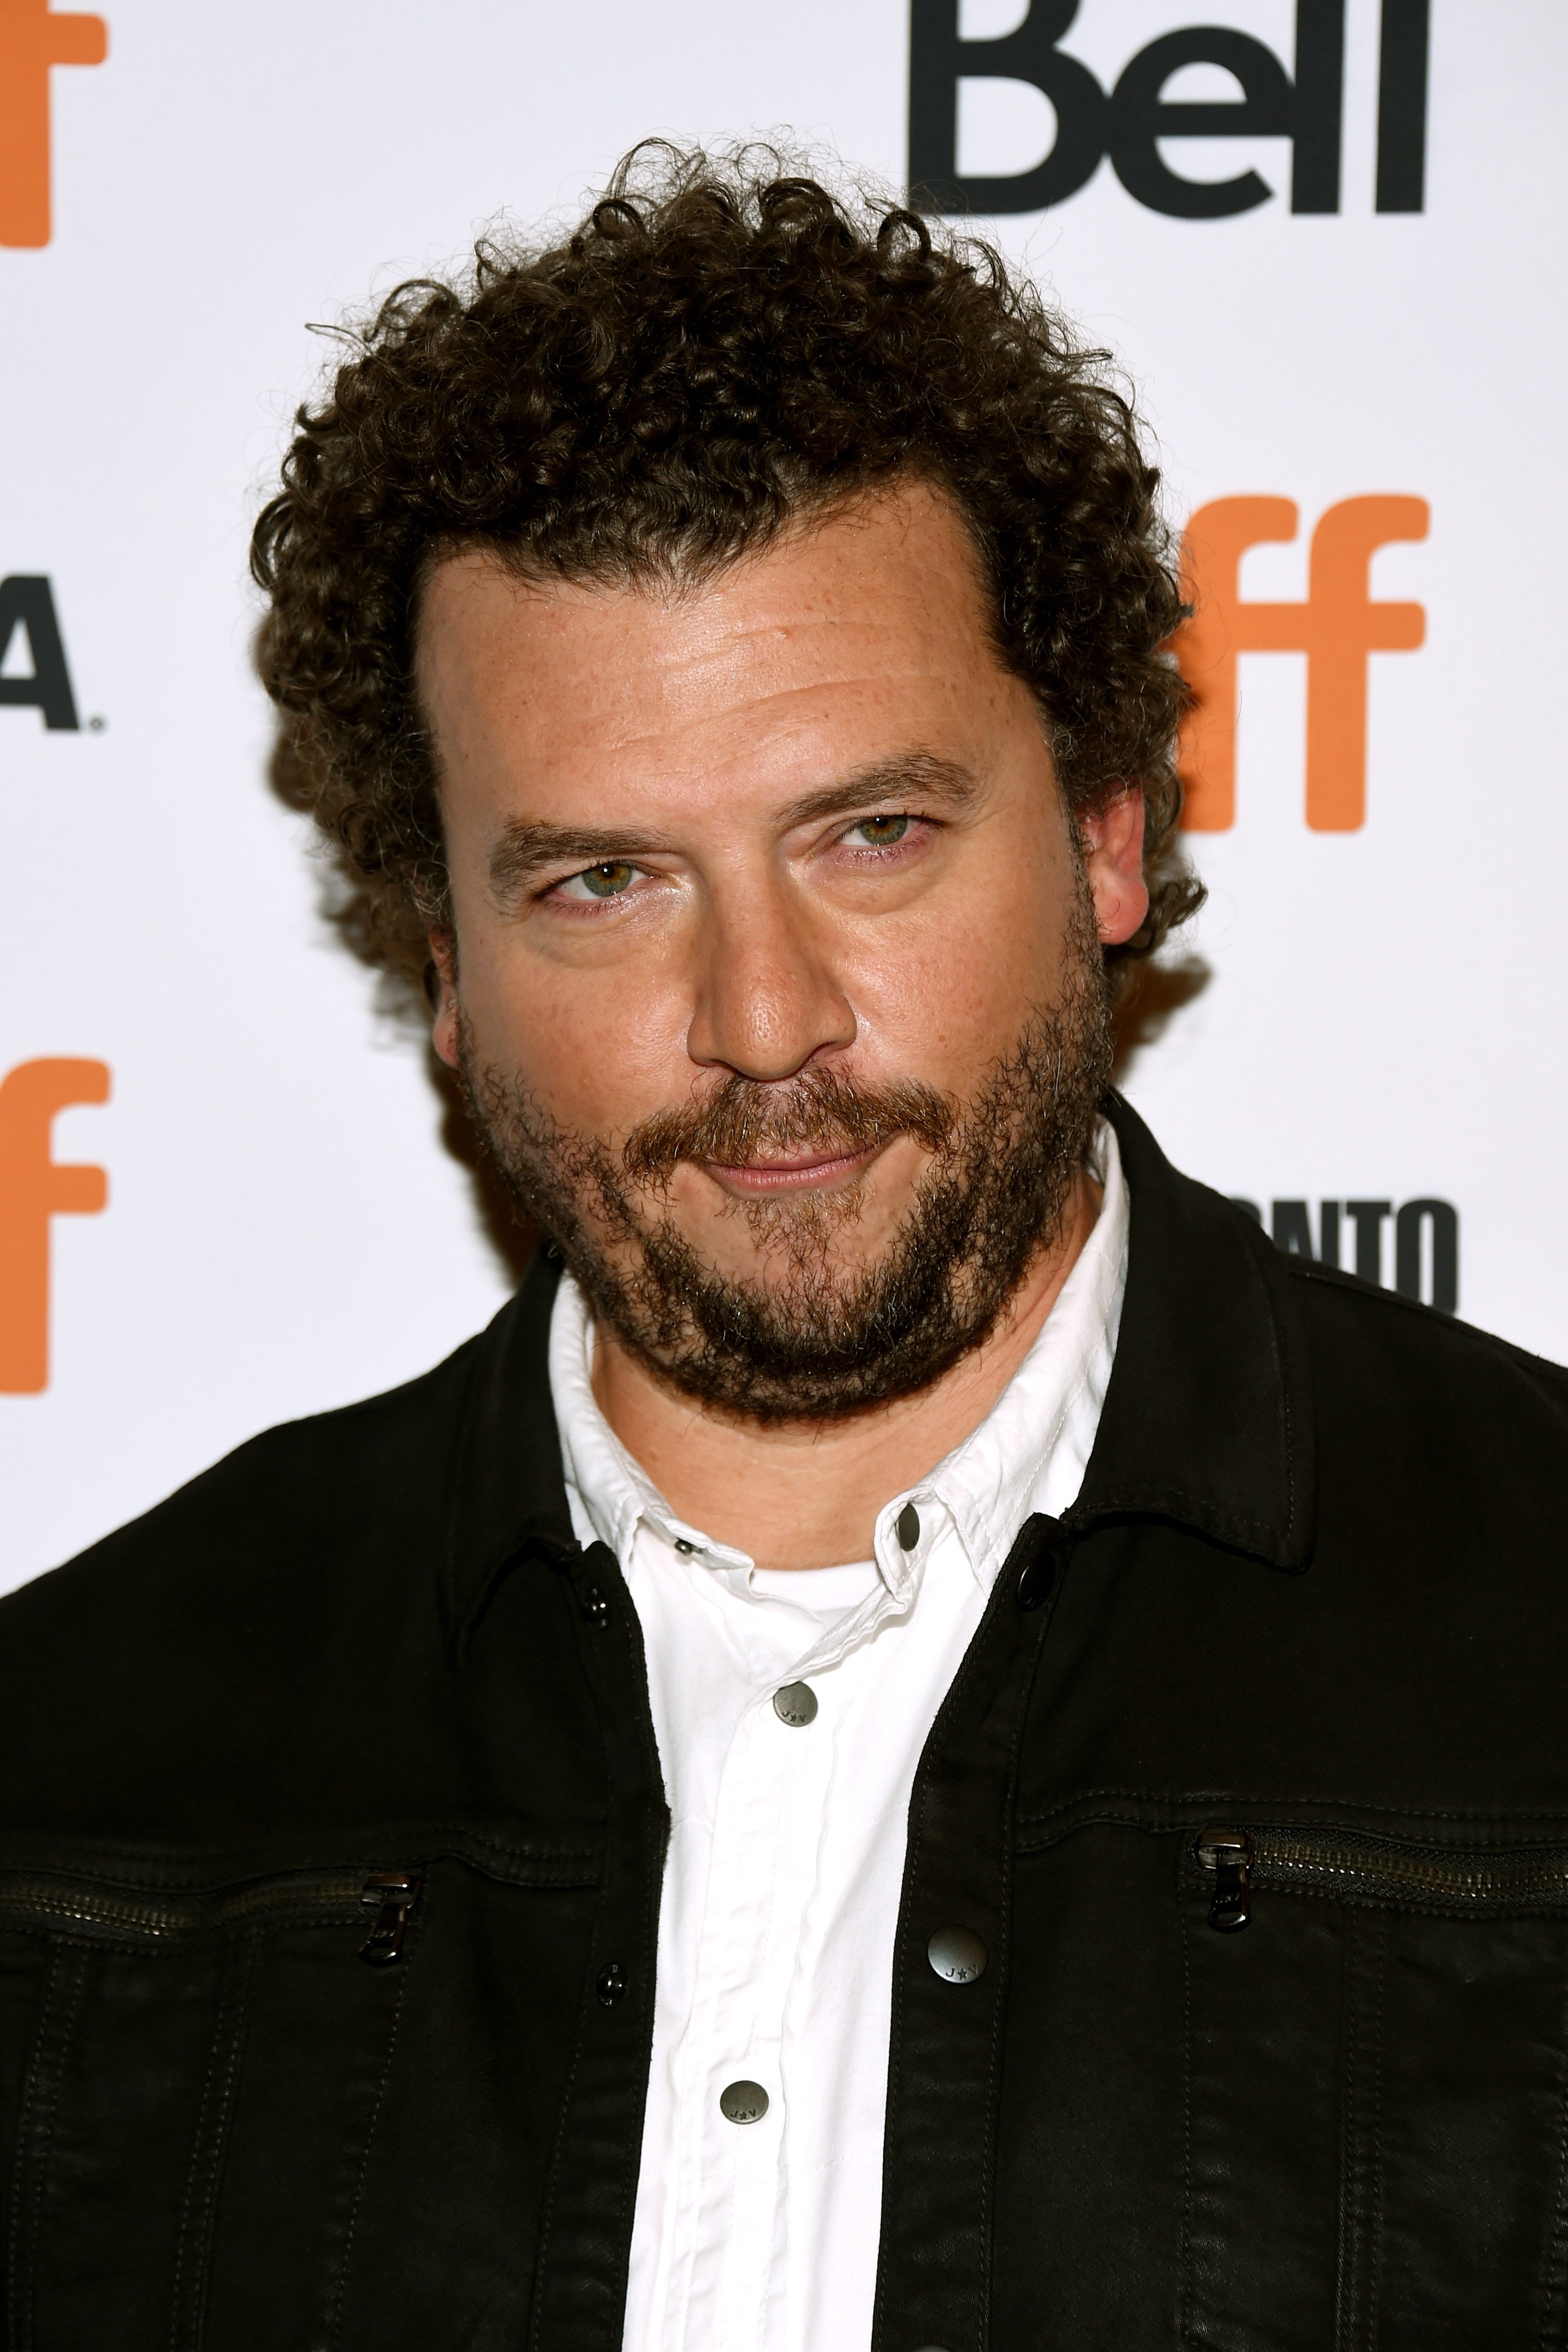  Danny McBride attends the "Halloween" premiere during 2018 Toronto International Film Festival at The Elgin on September 8, 2018 in Toronto, Canada. | Source: Getty Images